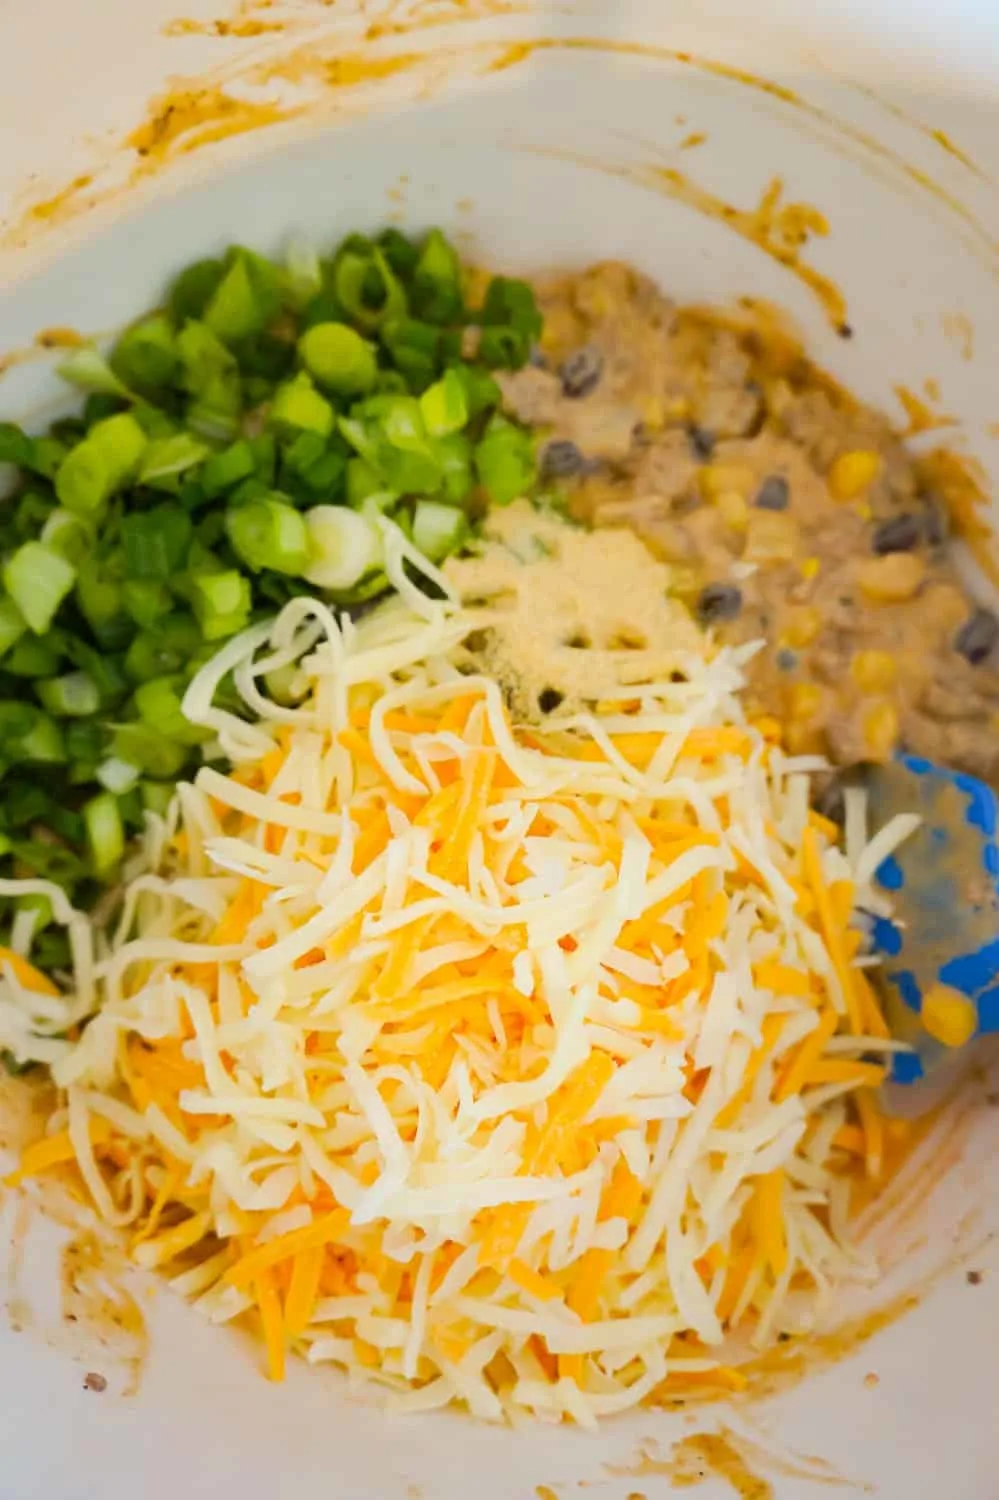 shredded cheese, chopped green onions and ground beef mixture in a mixing bowl